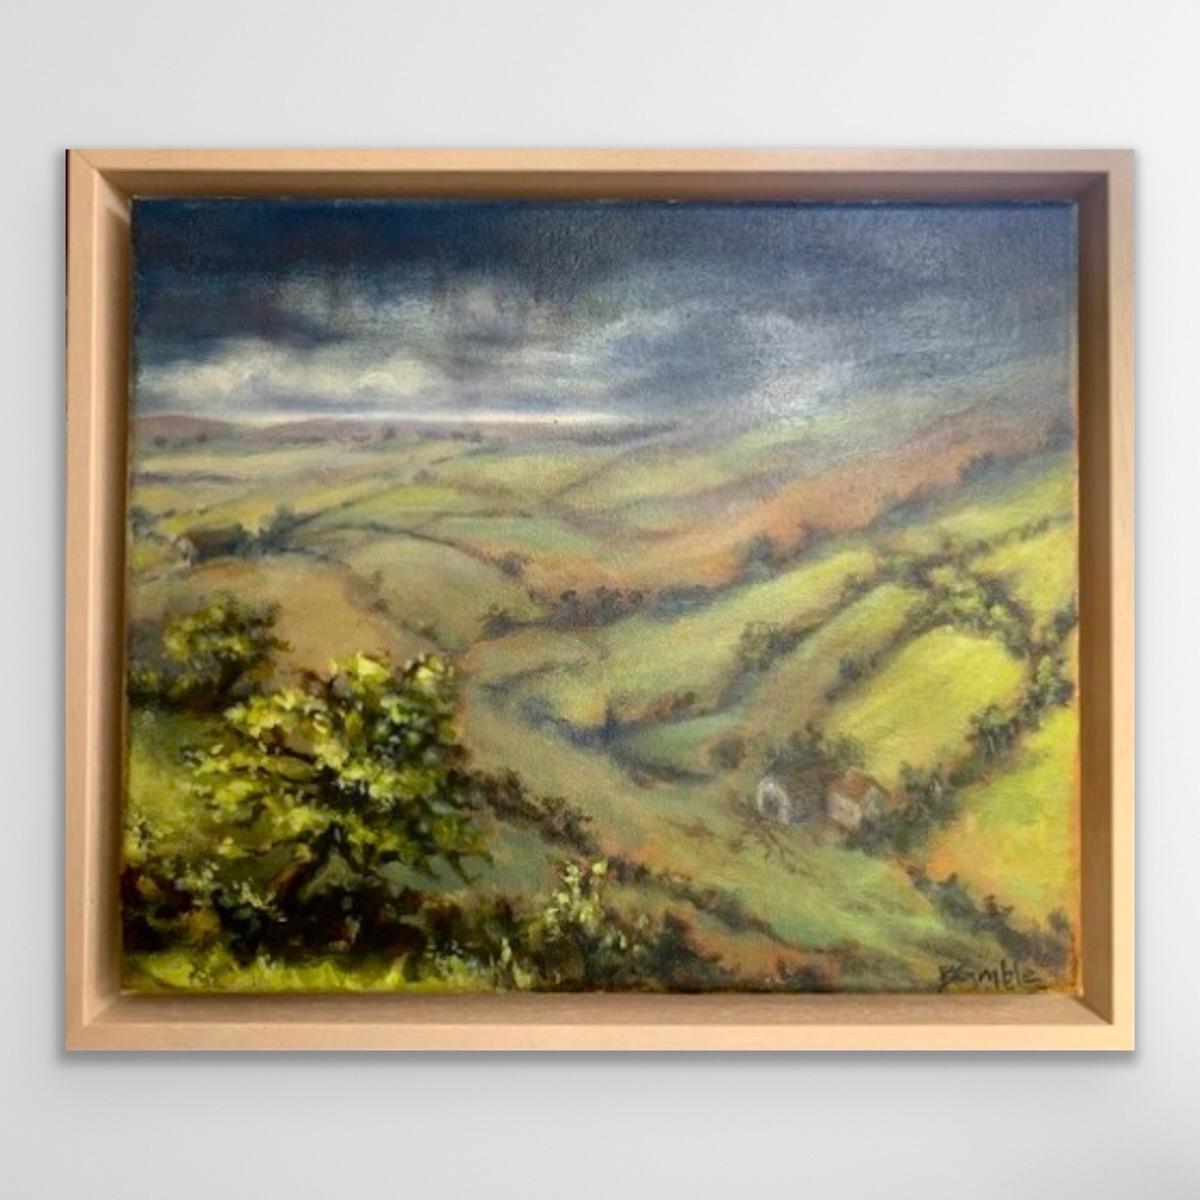 Cotswolds - 'After the Storm', Framed Original painting, Landscape Nature Rural - Painting by Nicky Bramble